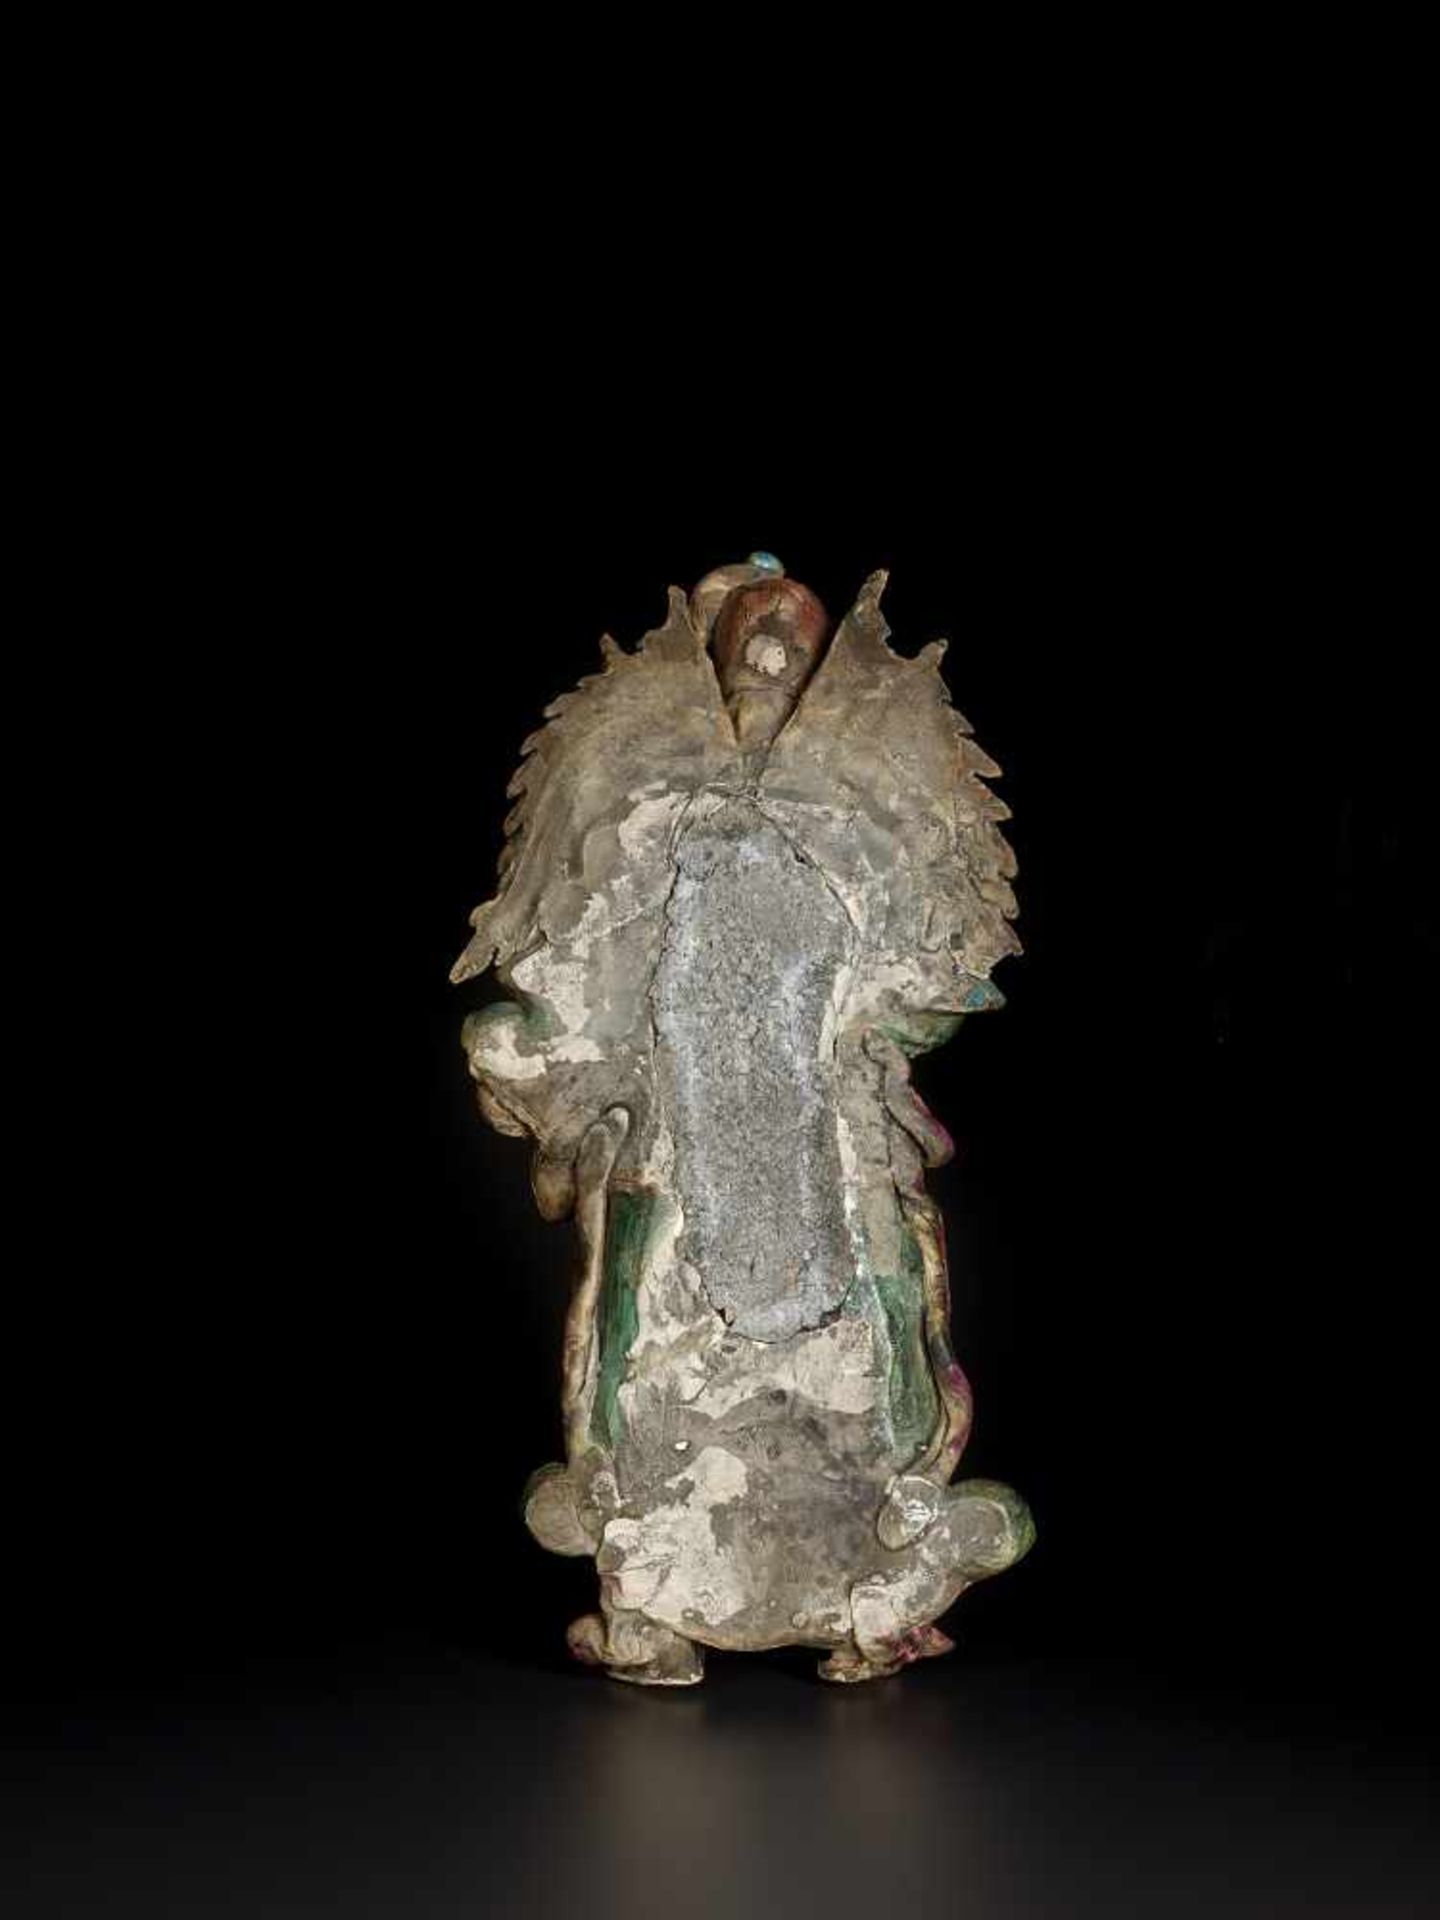 A FAHUA STATUE OF GUANDI, QINGChina, 17th-19th century. The neatly modelled figure glazed in - Image 4 of 6